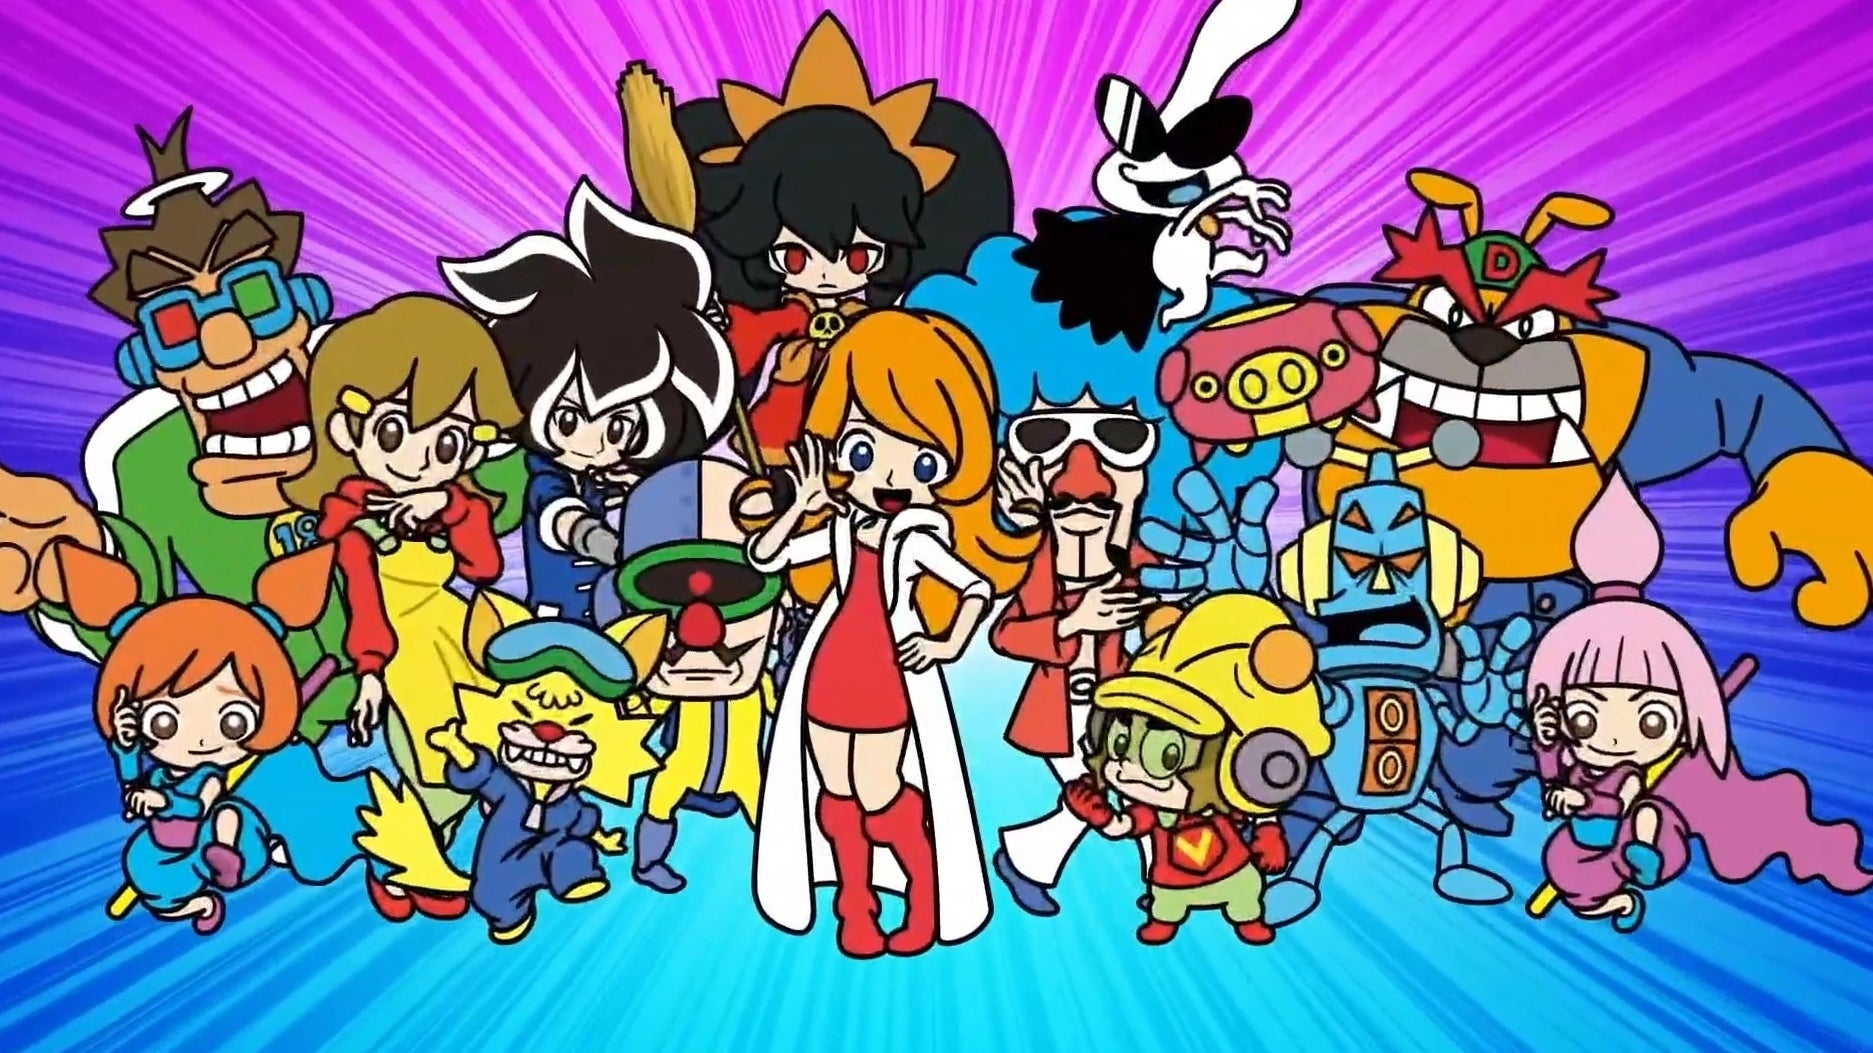 Image for There's a new WarioWare game coming to Switch in September